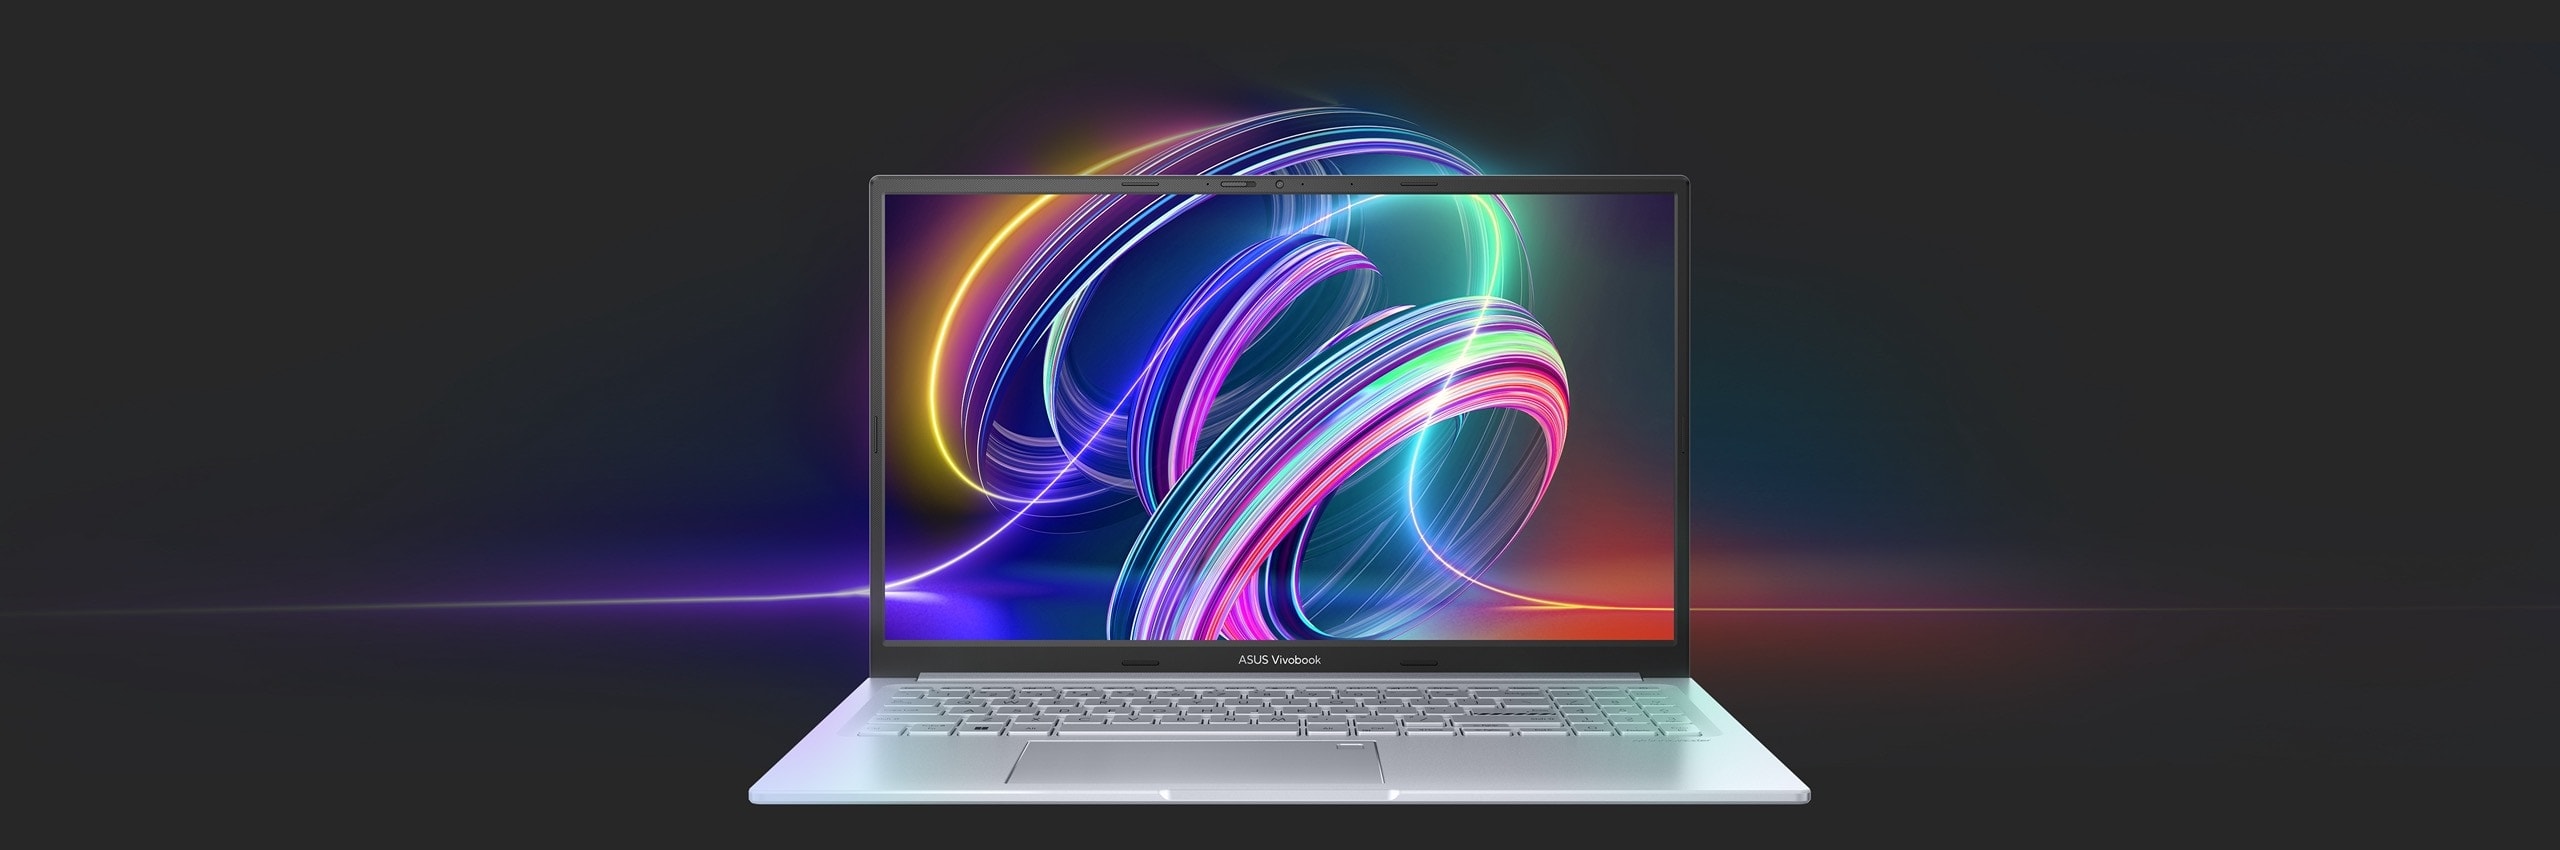 https://dlcdnwebimgs.asus.com/files/media/5468cfdc-4c18-4771-b708-5de055d025cb/v1/features/sections/display/images/outer/large/1x/s1/main.jpg